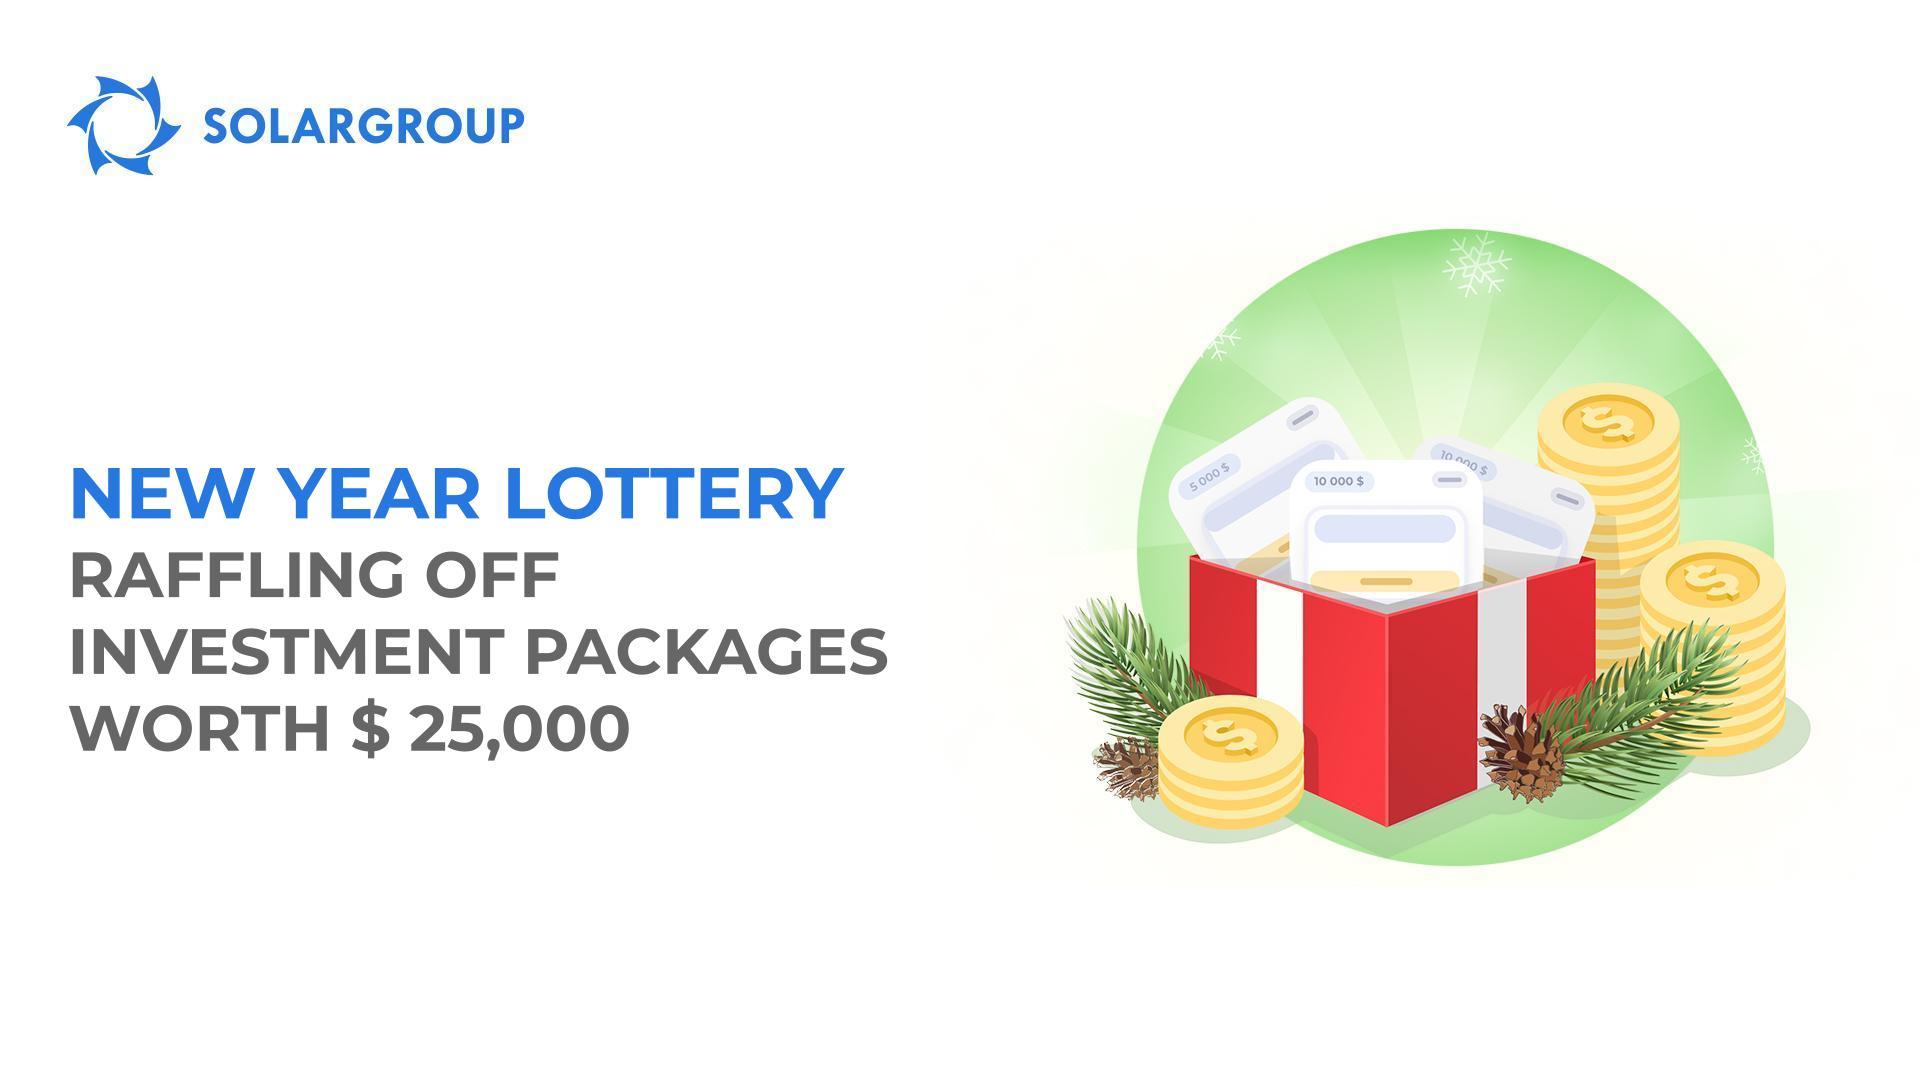 Win an investment package worth up to $ 15,000